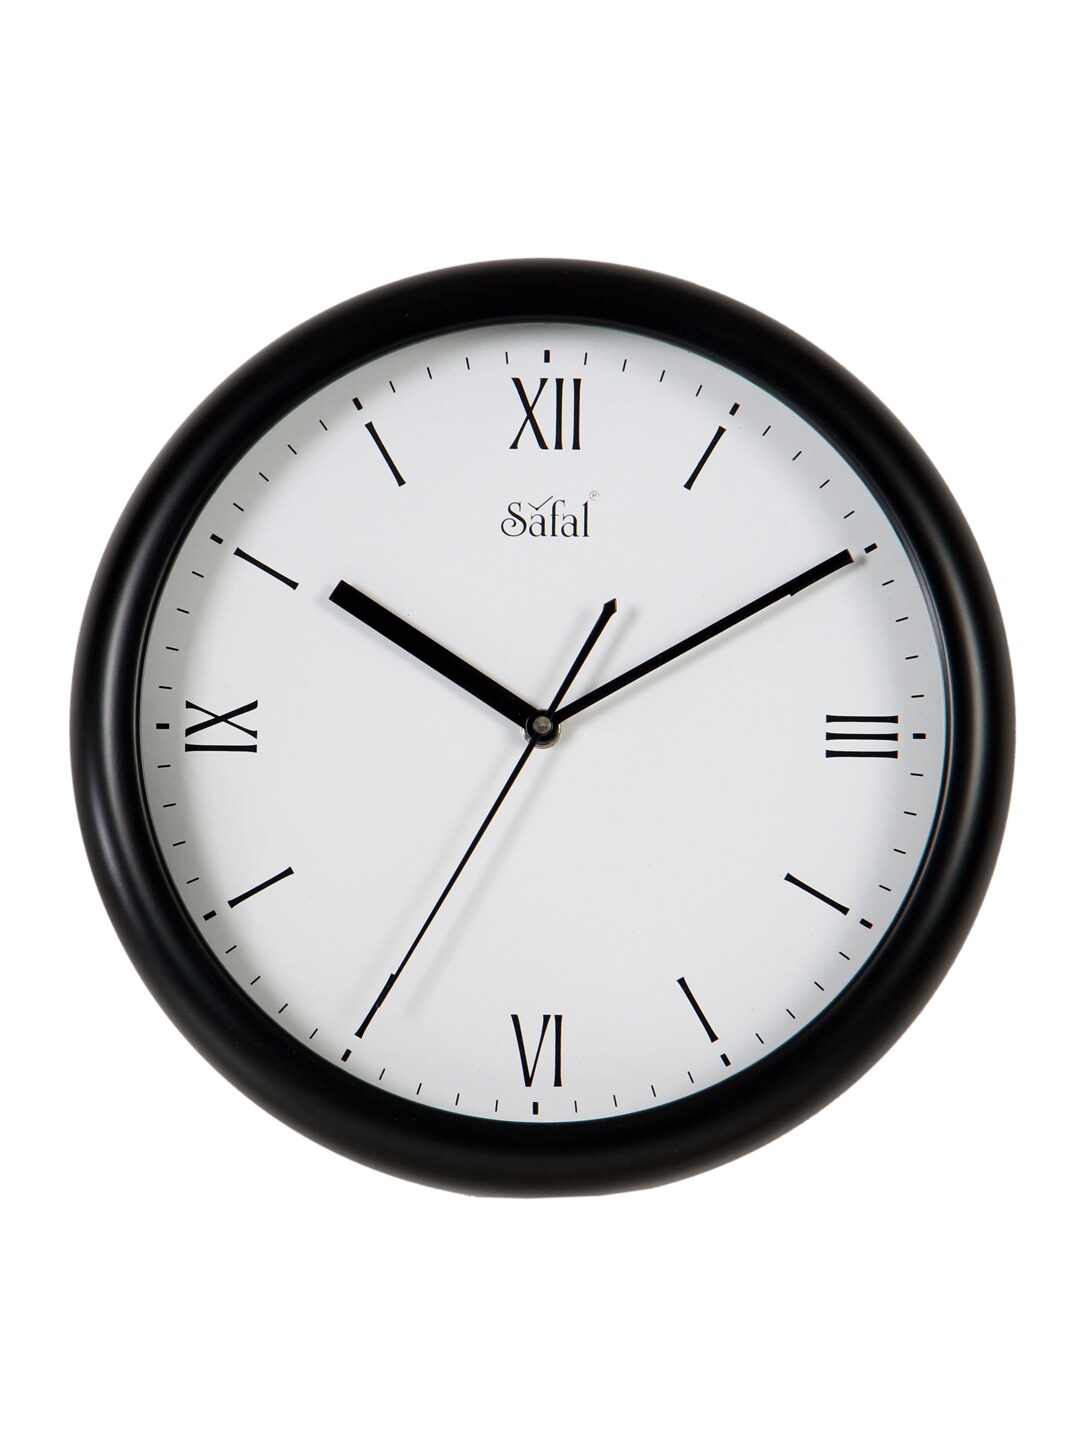 Safal White Dial Round 28 cm Analogue Wall Clock Price in India